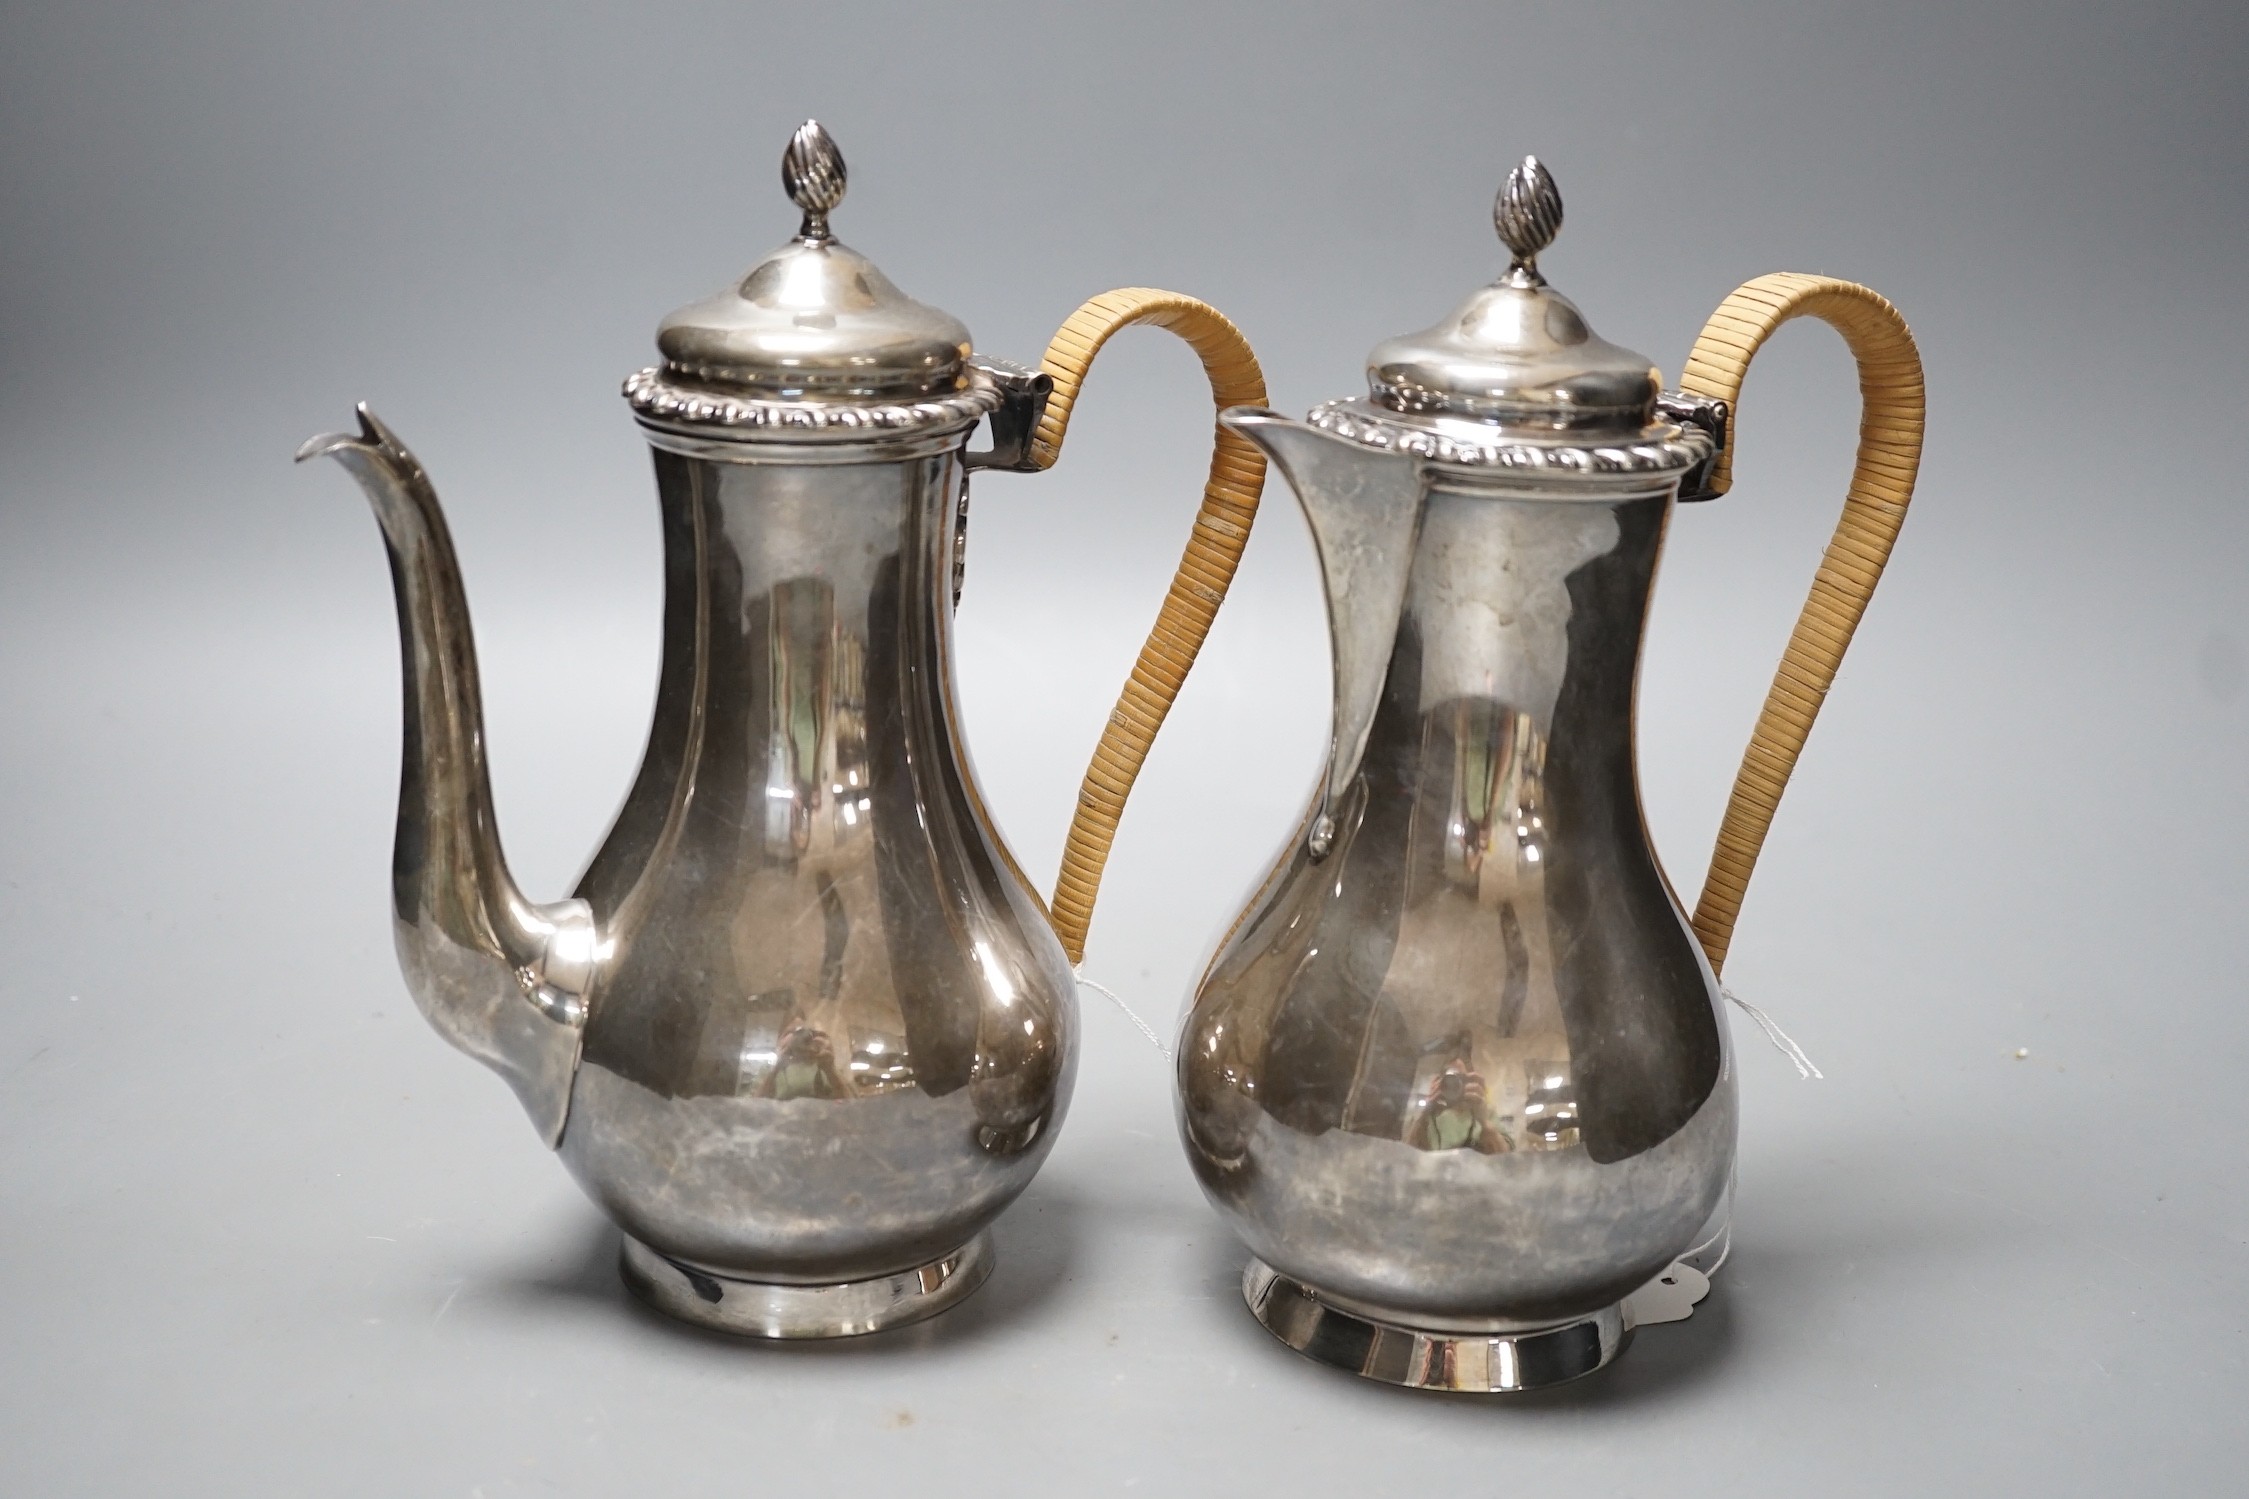 A matched early 20th century silver cafe au lait pair, London, 1900 & 1903, one by Edward Charles Purdie, height 21cm et infra, gross weight 31.1oz.